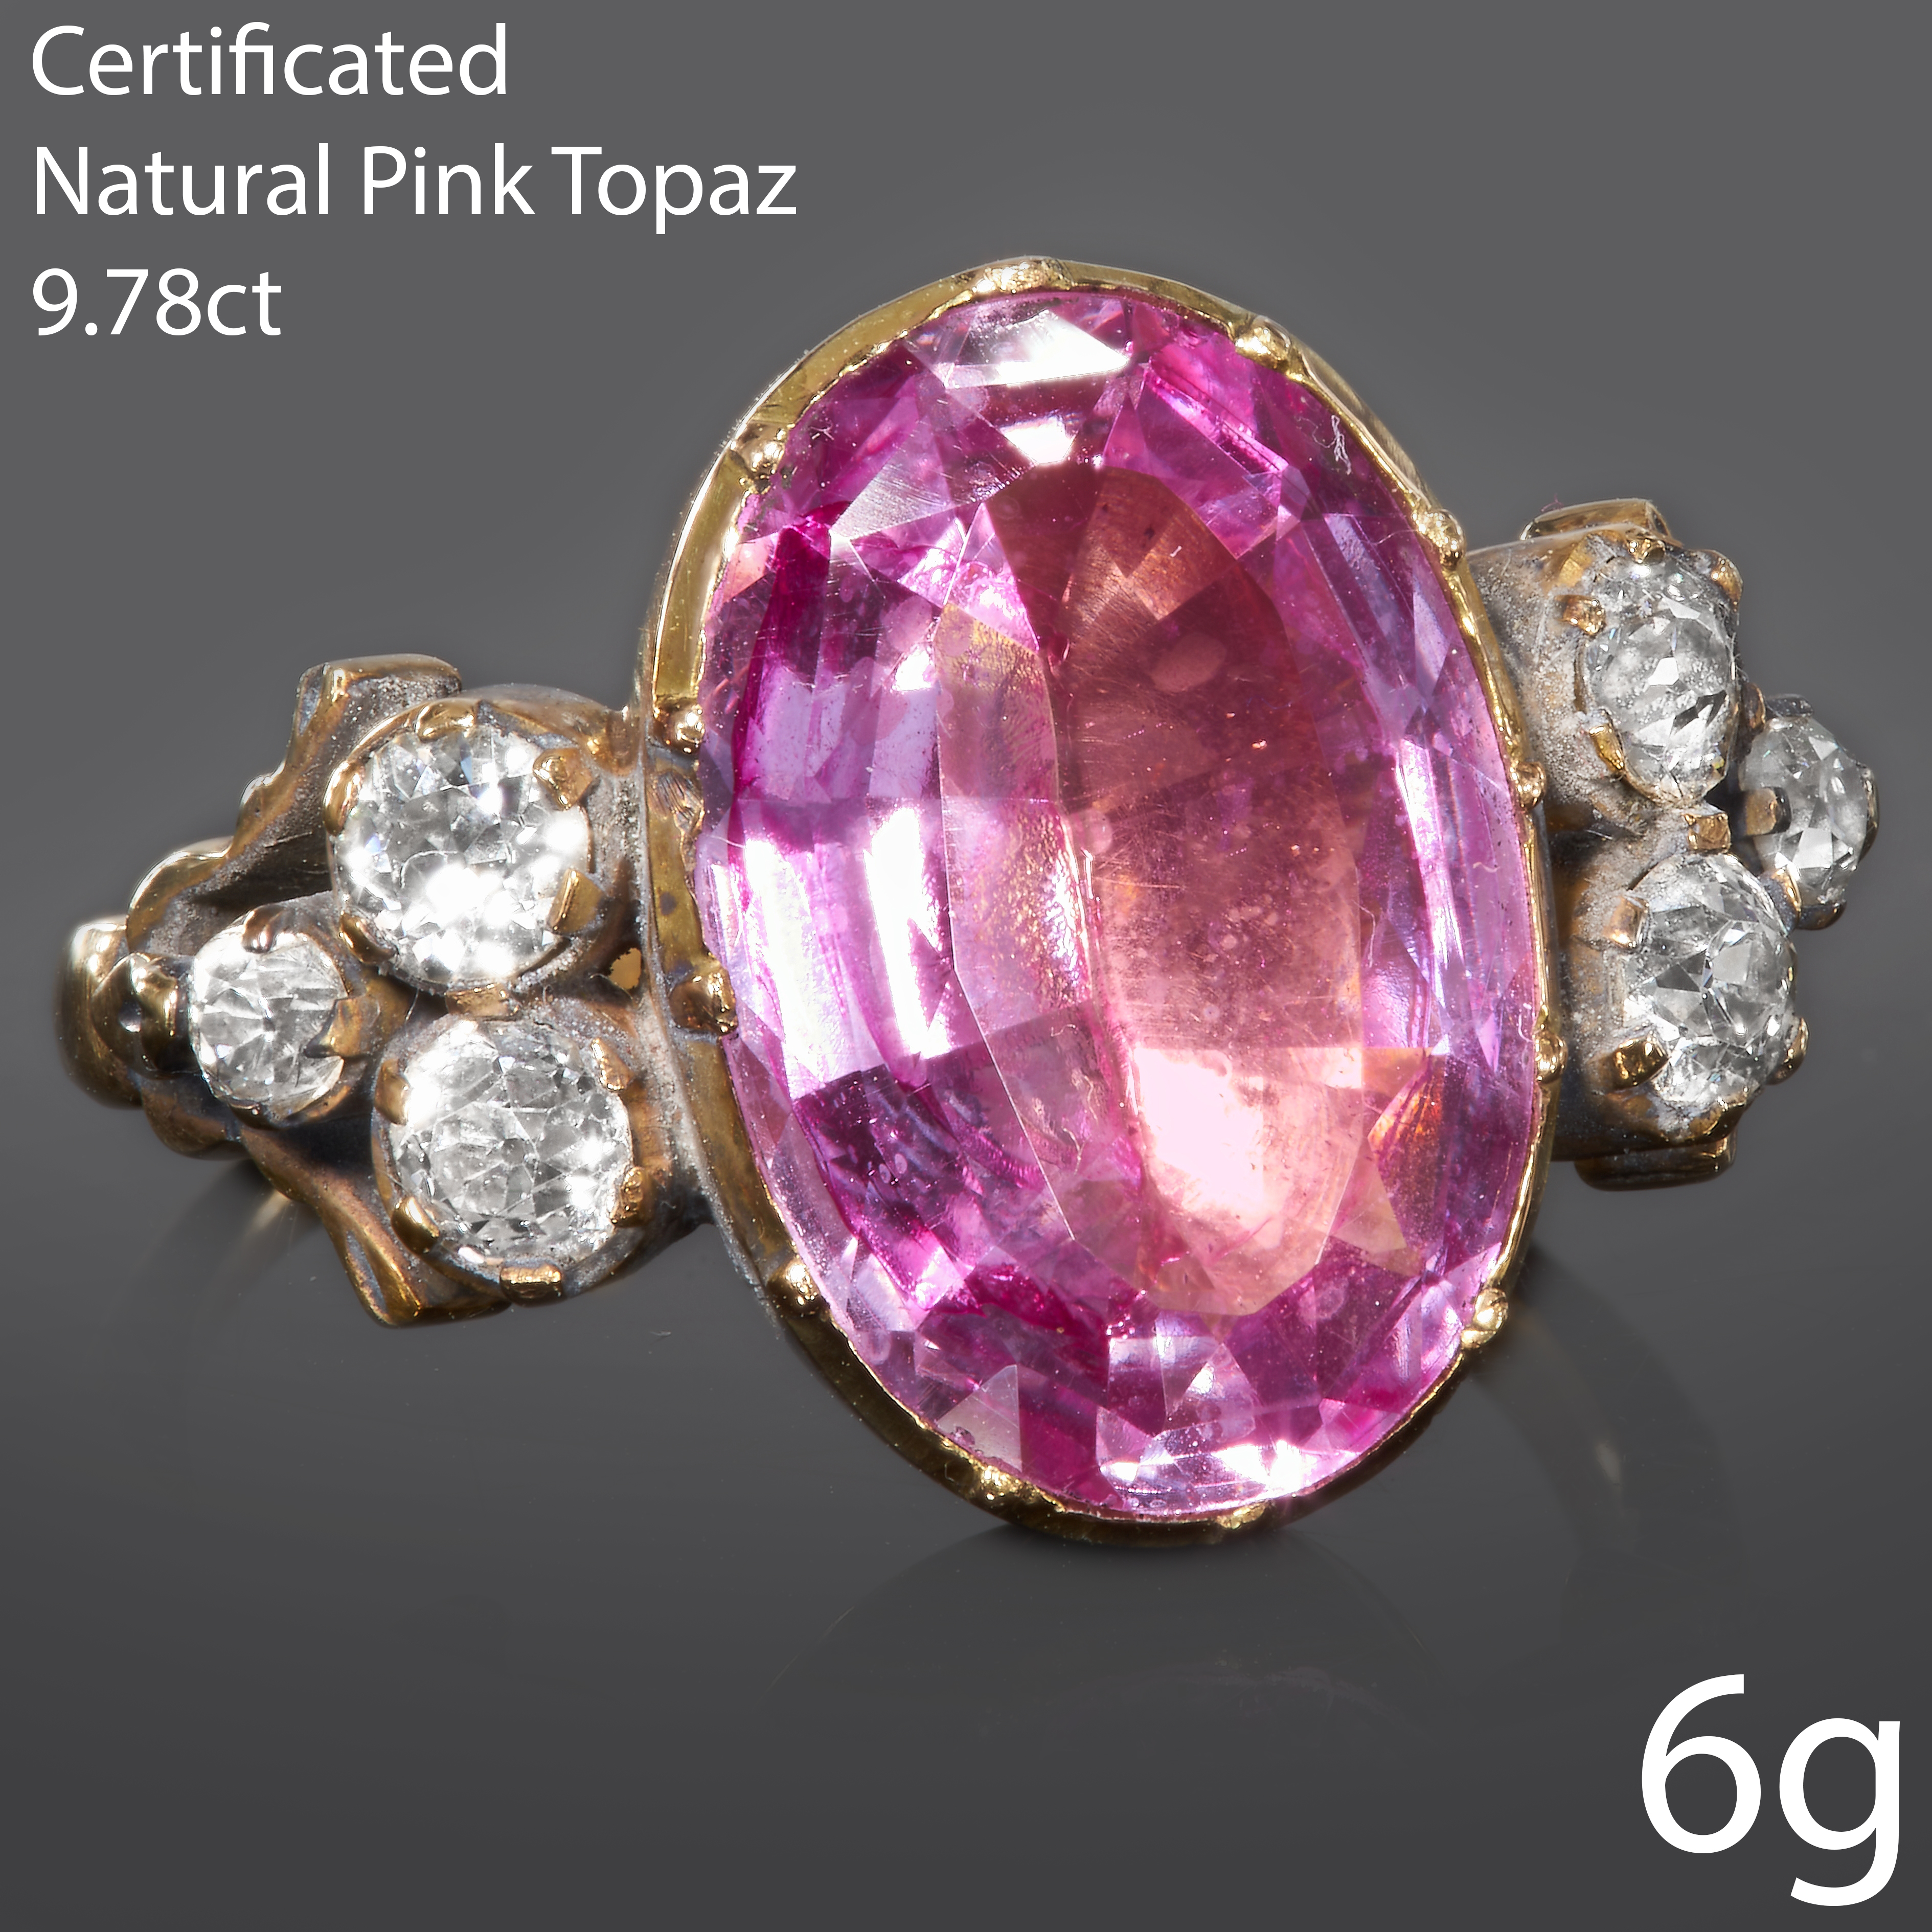 CERTIFICATED PINK TOPAZ AND DIAMOND RING